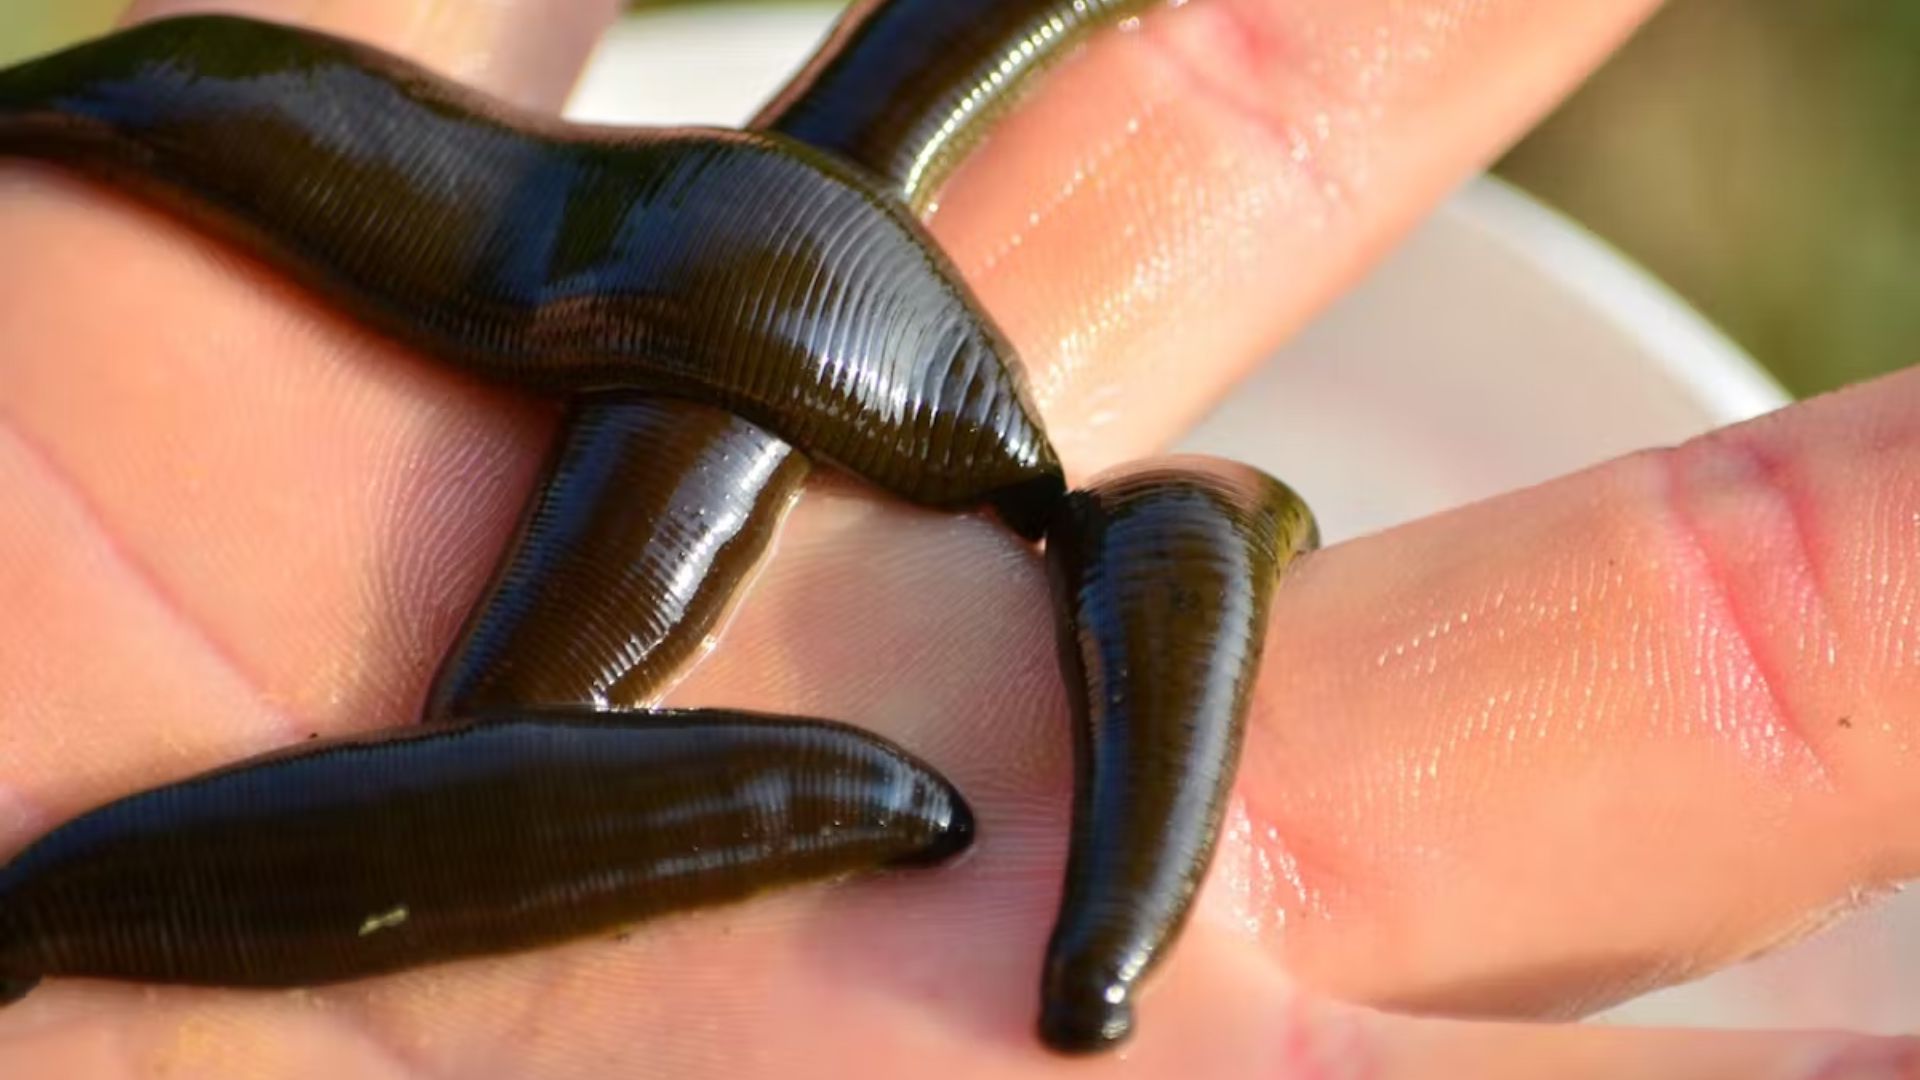 Leeches on a Person's Hand